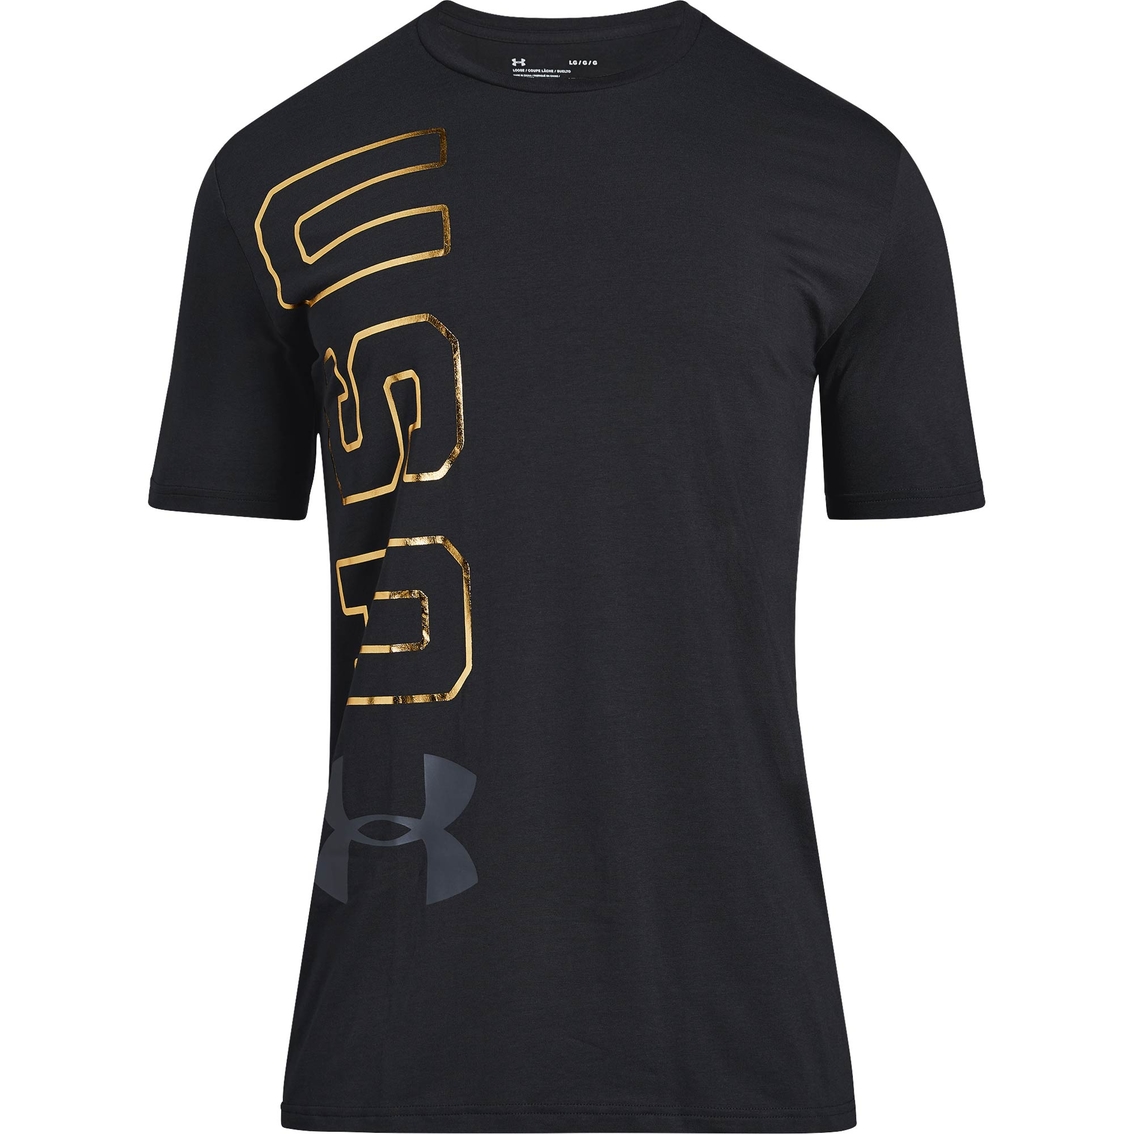 Under Armour Mens Freedom USA Vertical t-Shirt